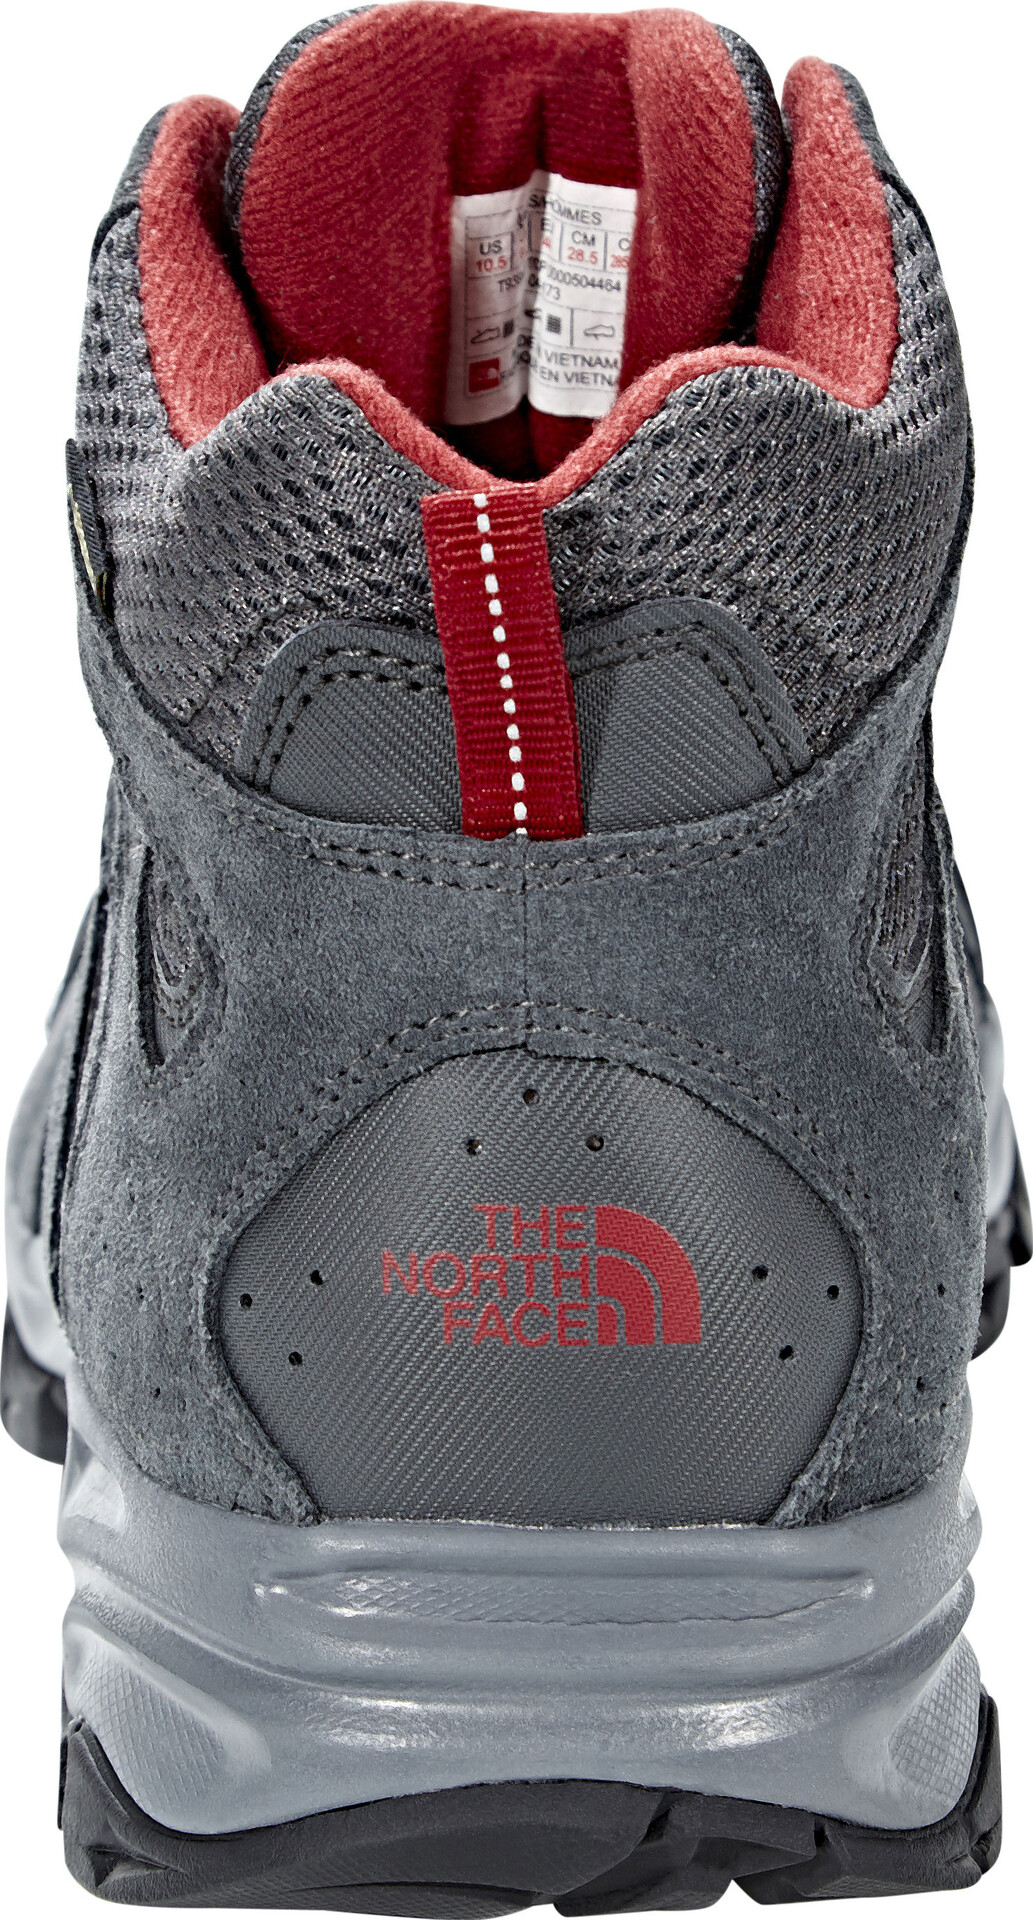 the north face m storm hike mid gtx